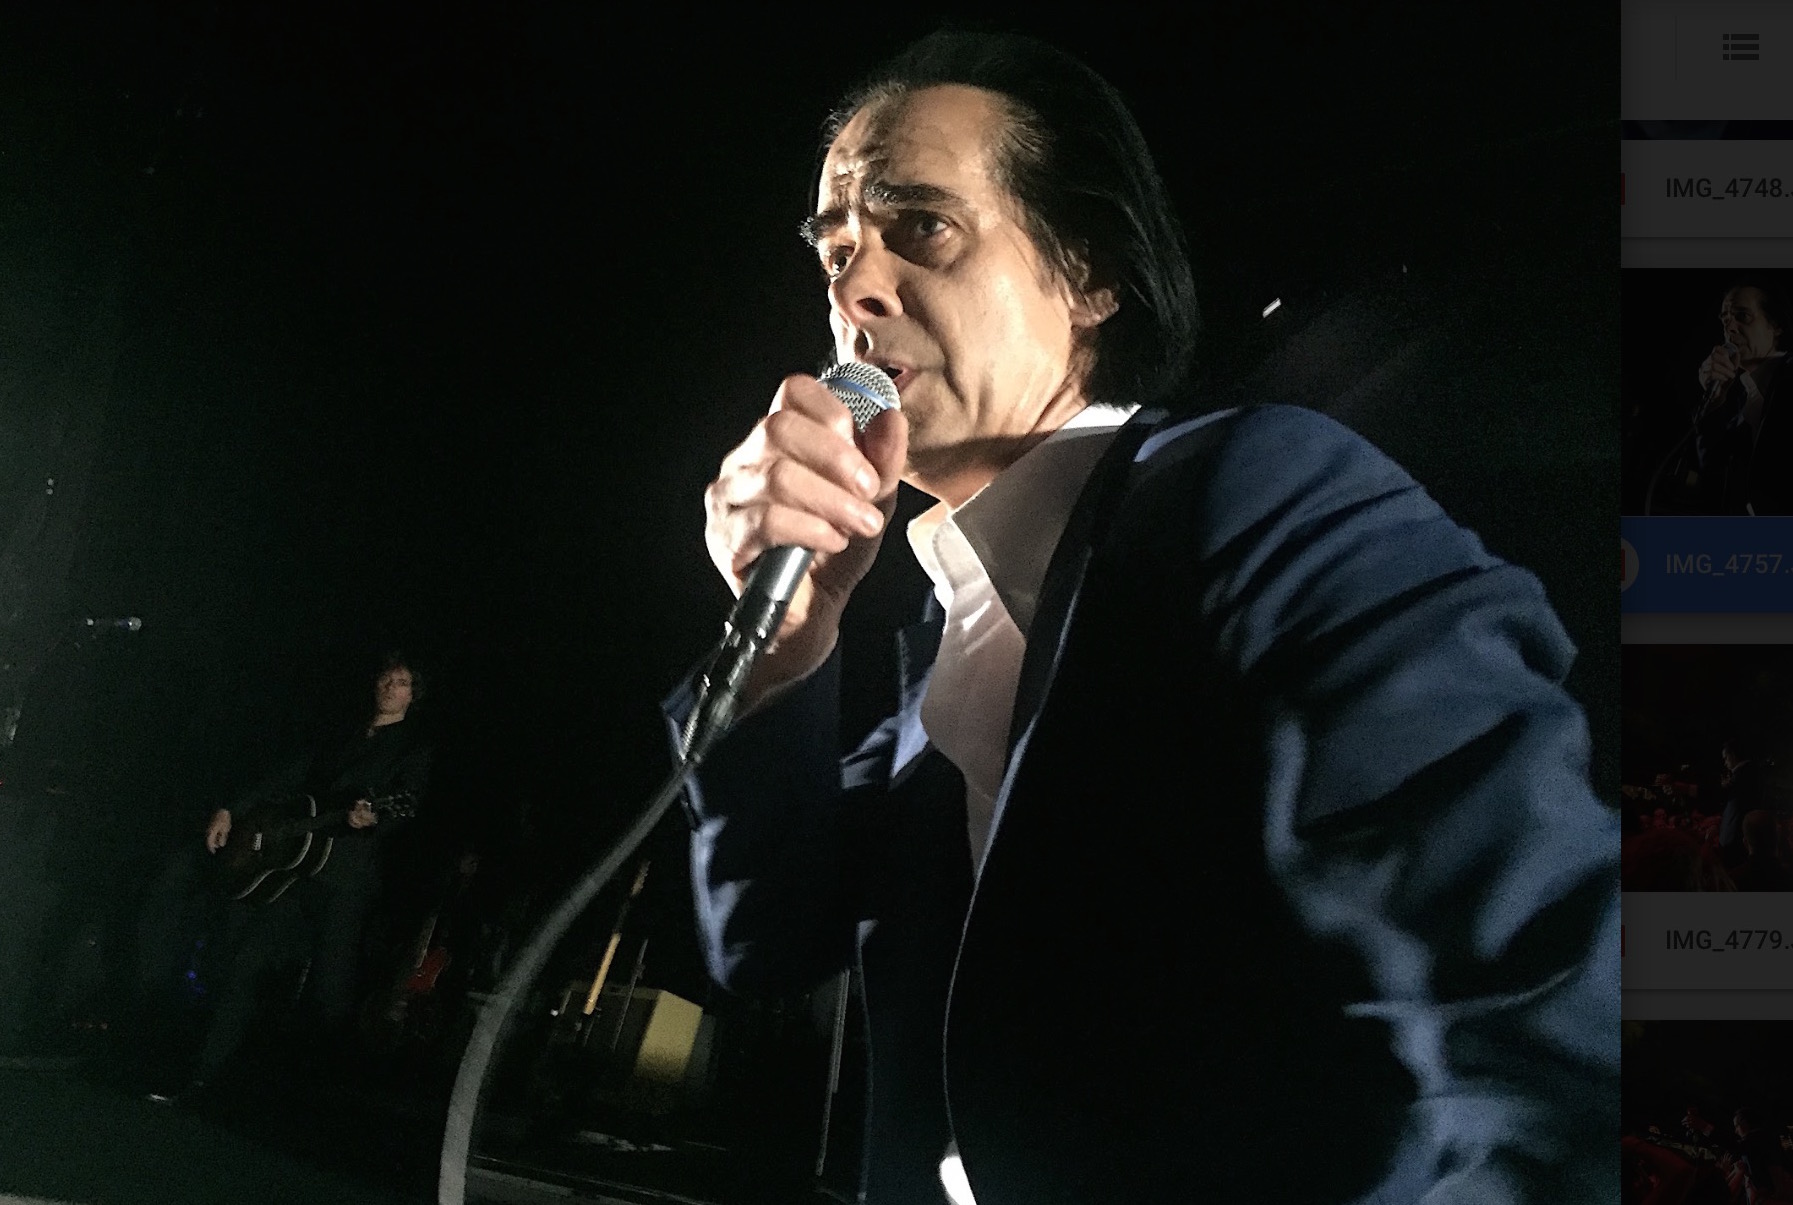 Nick Cave at The Greek - Photo © 2017 Alyson Camus for California Rocker